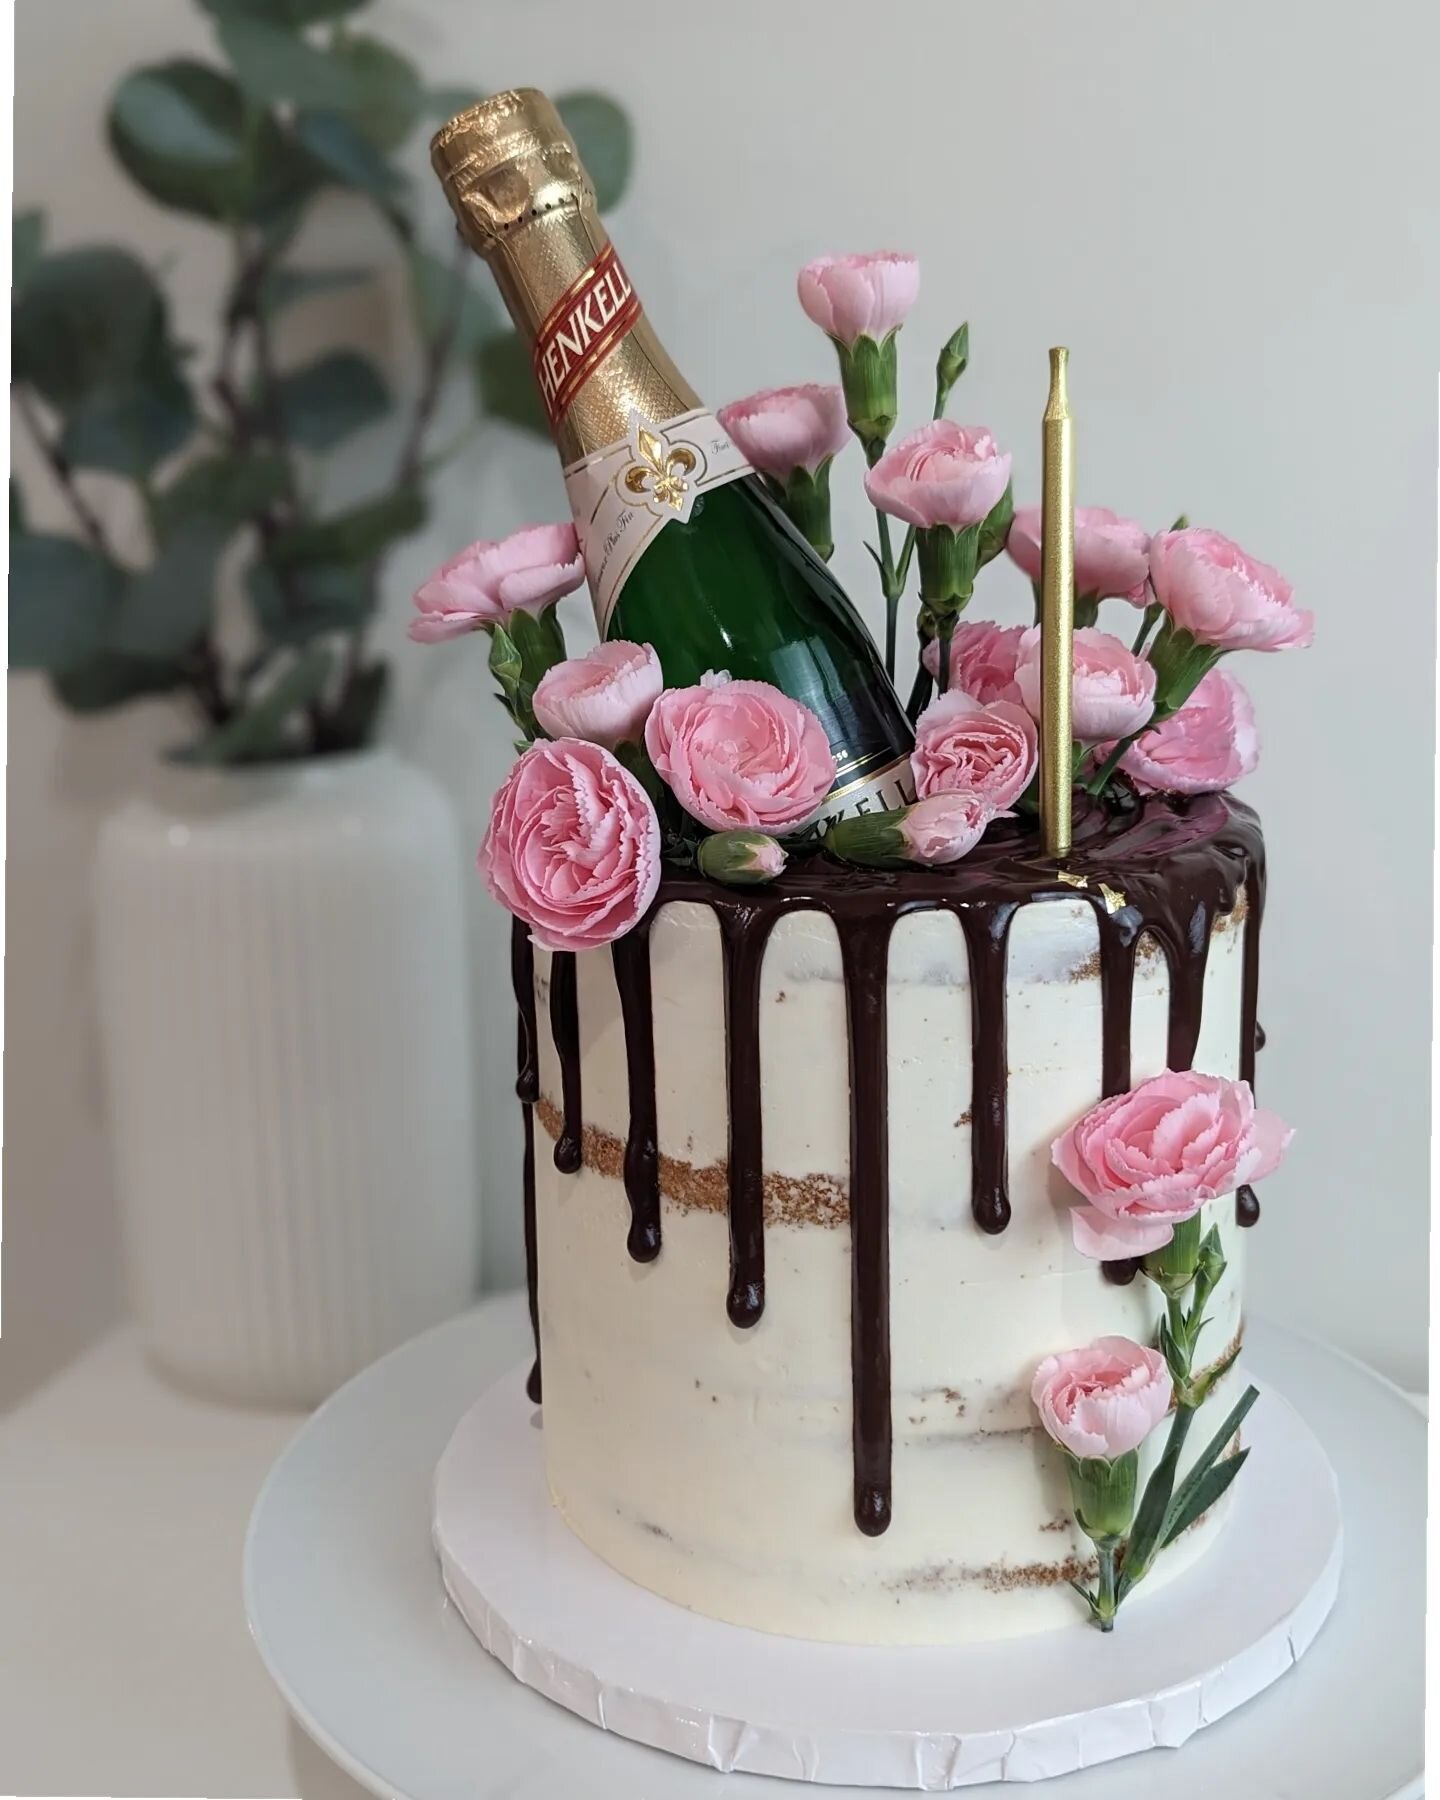 Vanilla layers with fudgey chocolate and whipped salted caramel in between. An elegant drip, pops of pink and a bottle to pop, now that's a great birthday cake 💘🍾
.
.
.
.
.
#nakedcake #nakedcakes #dripcake #chocolatedrip #chocolatedripcake #floralc